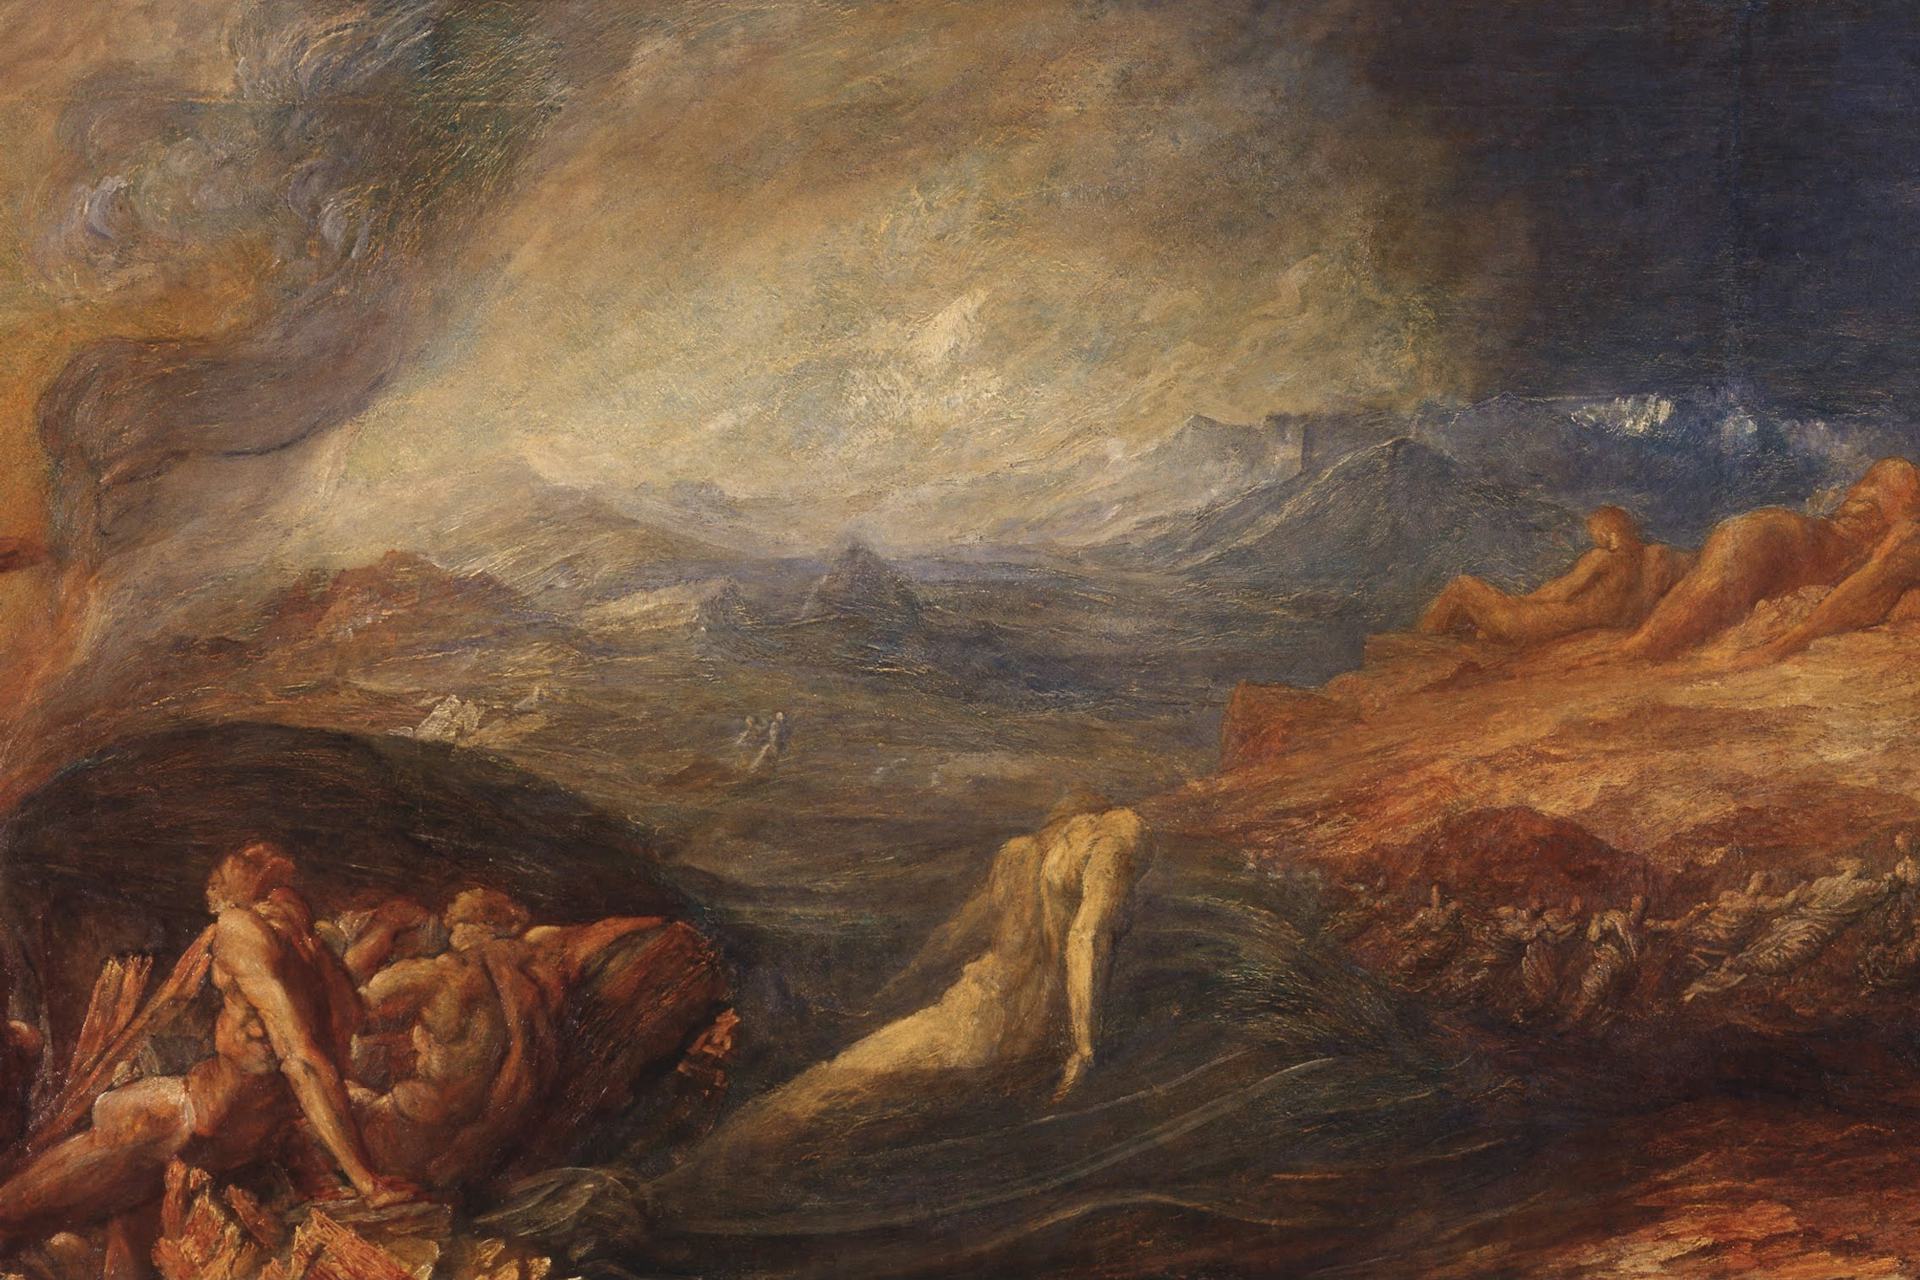 Chaos by George Frederic Watts and Assistants (ca. 1875)